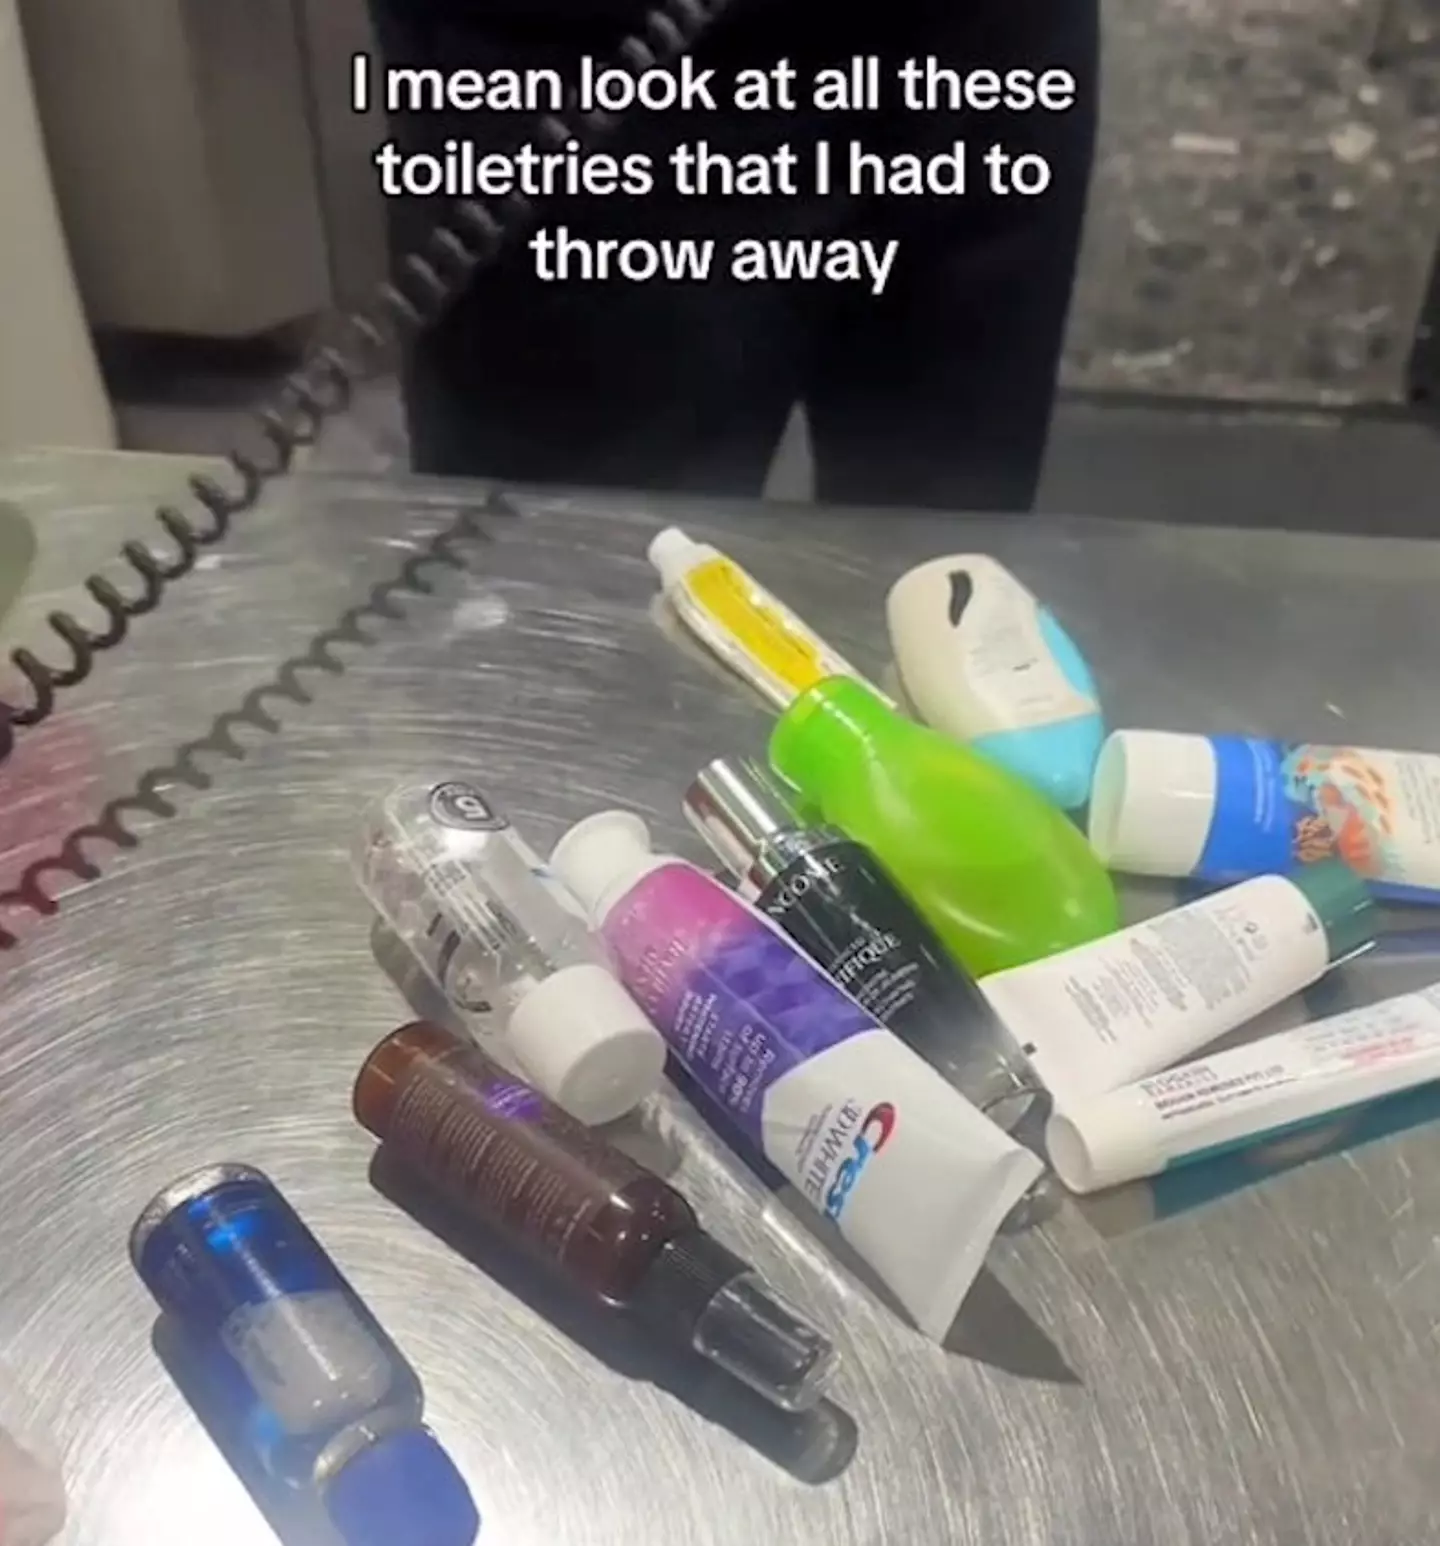 Chloe had to give up numerous toiletries.